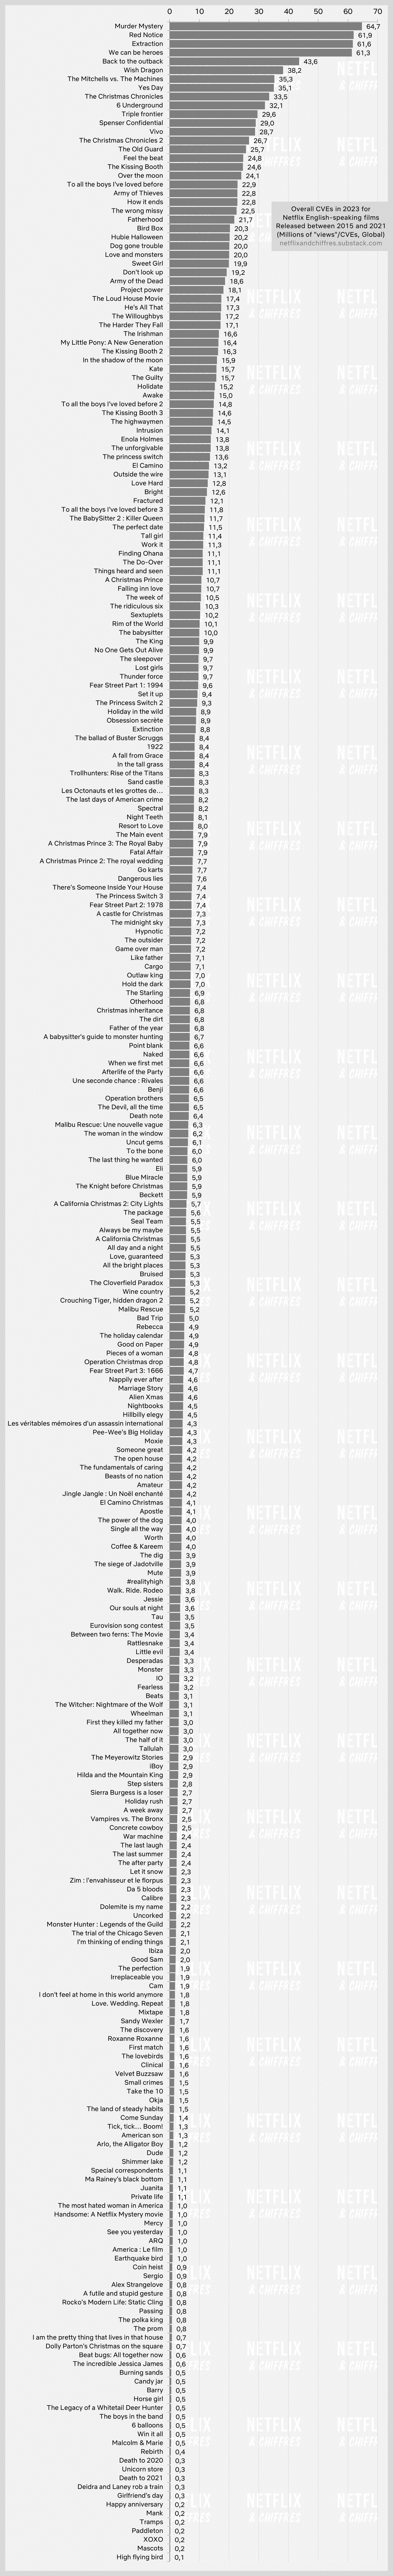 Full List Of Most Watched Movies Pre 2022 On Netflix